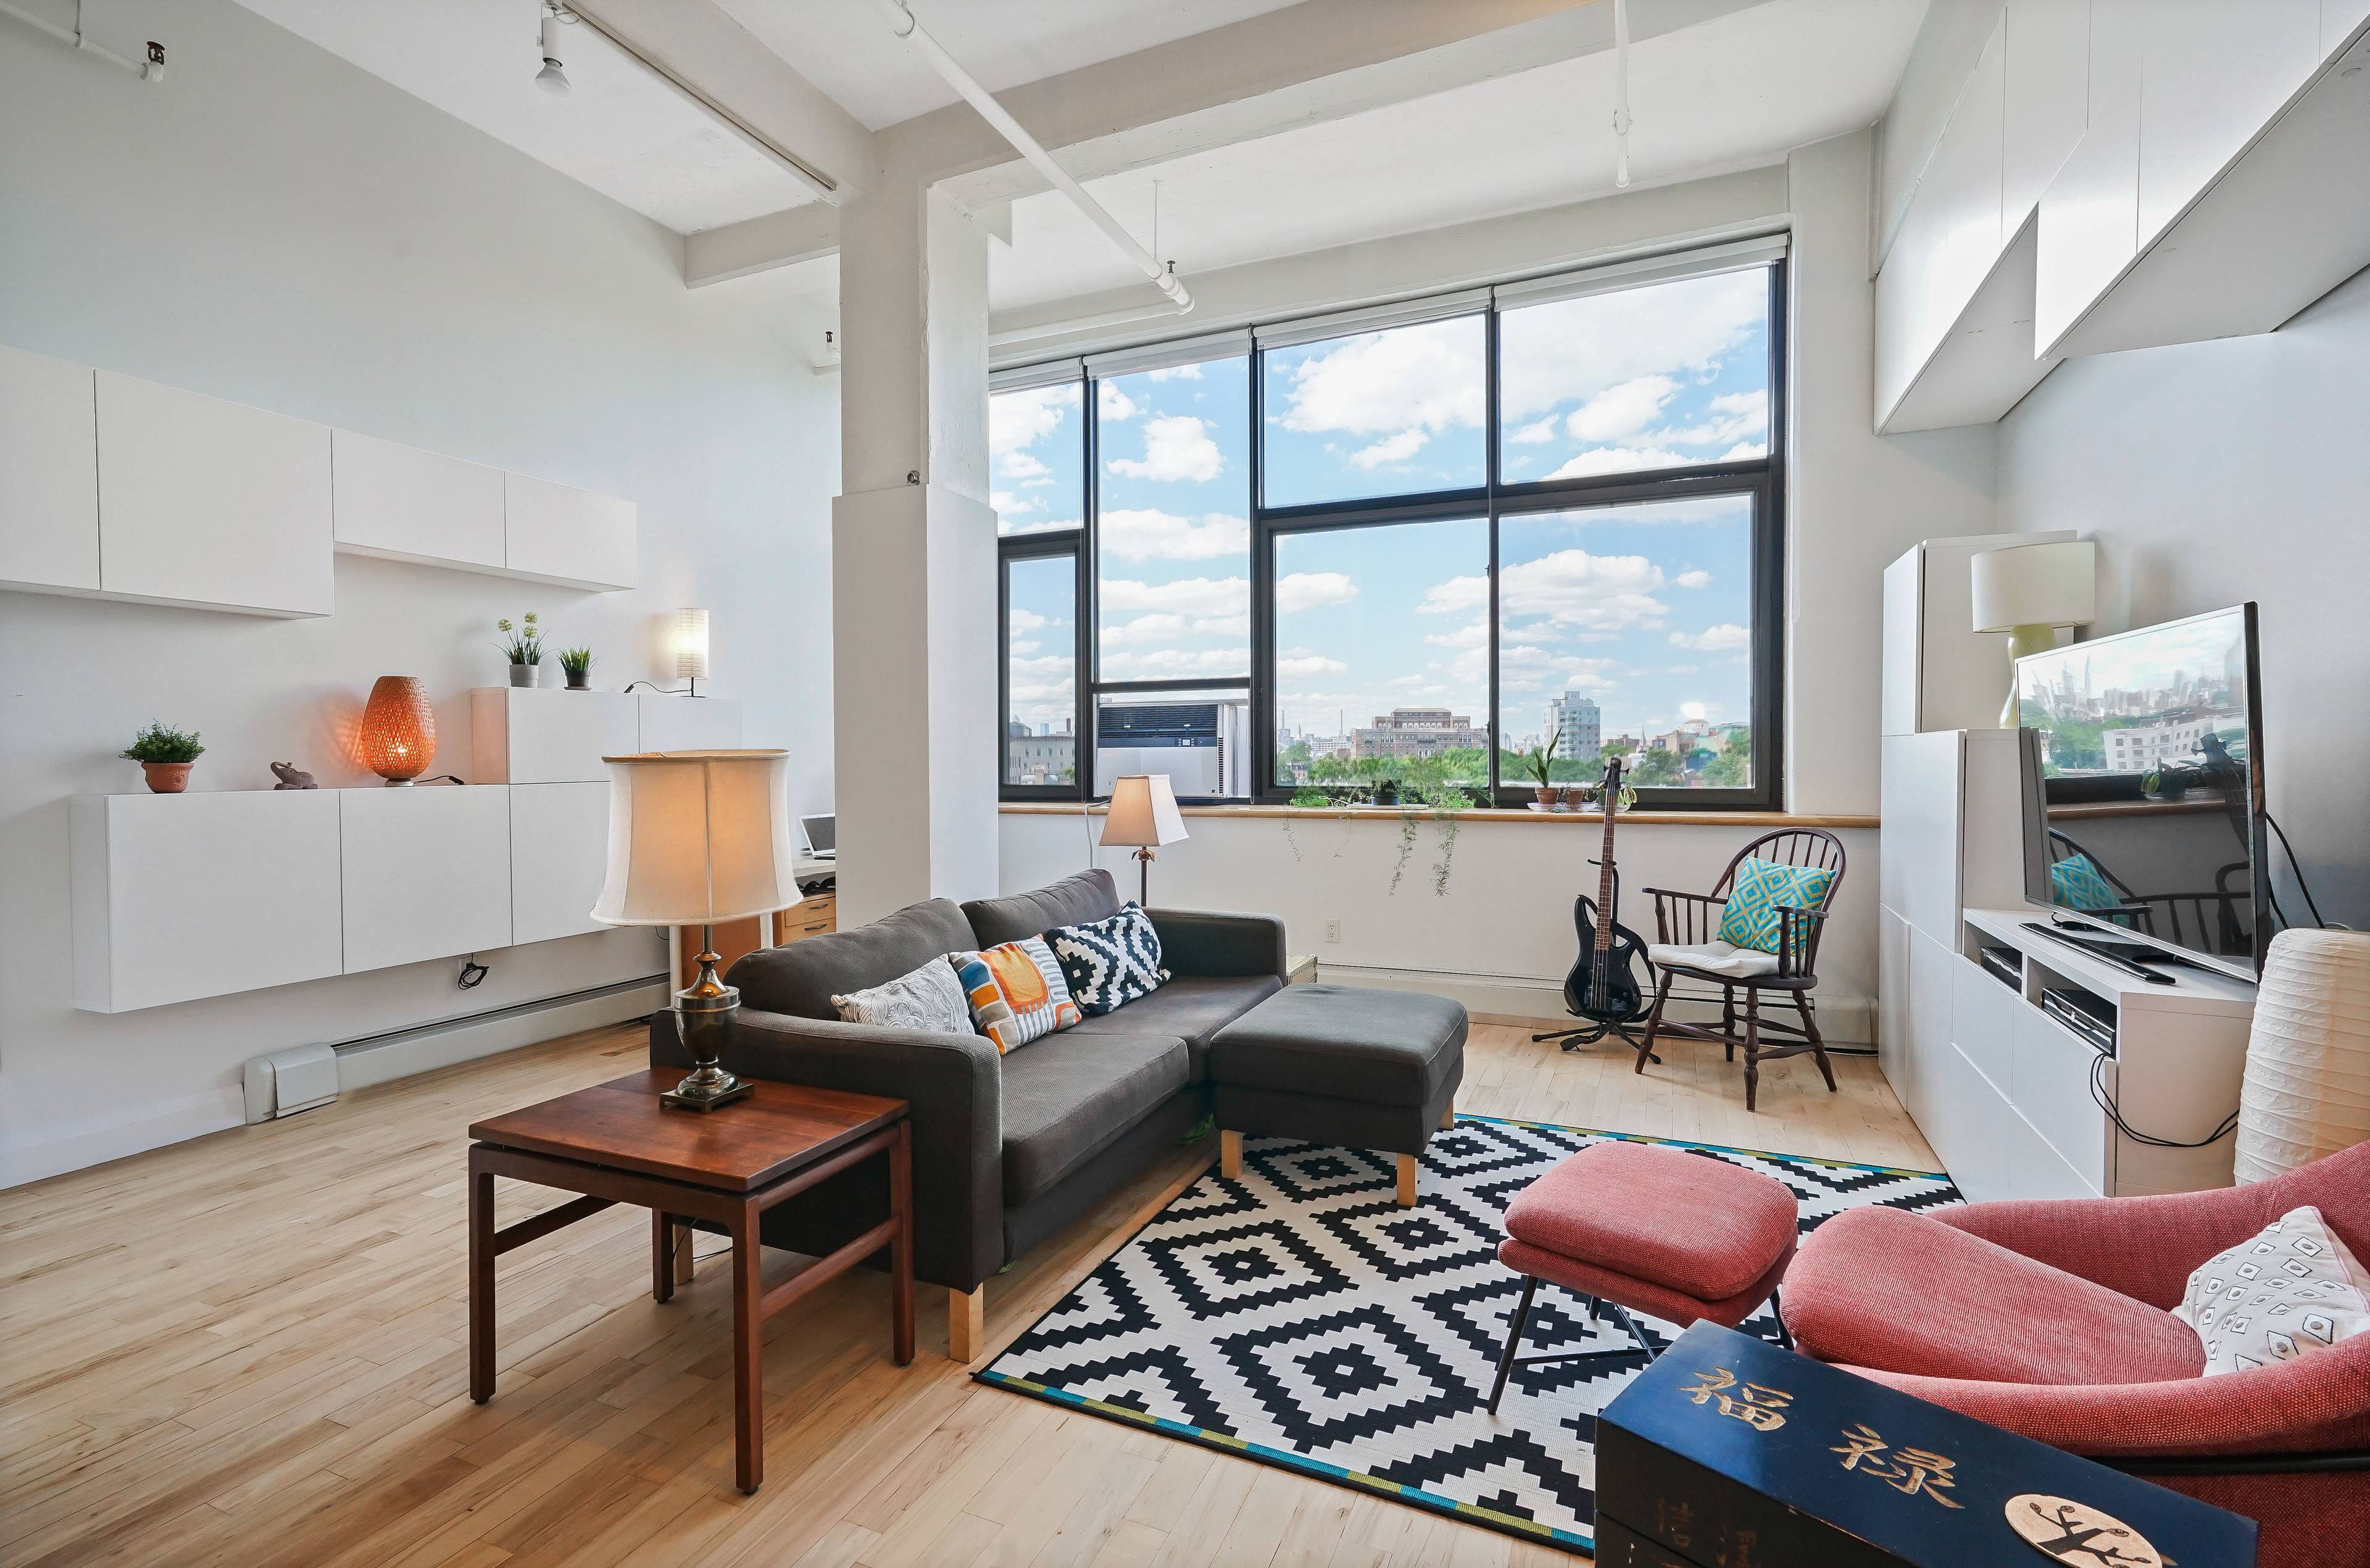 Classic loft living in the iconic Newswalk Building an oasis in the heart of Brooklyn.